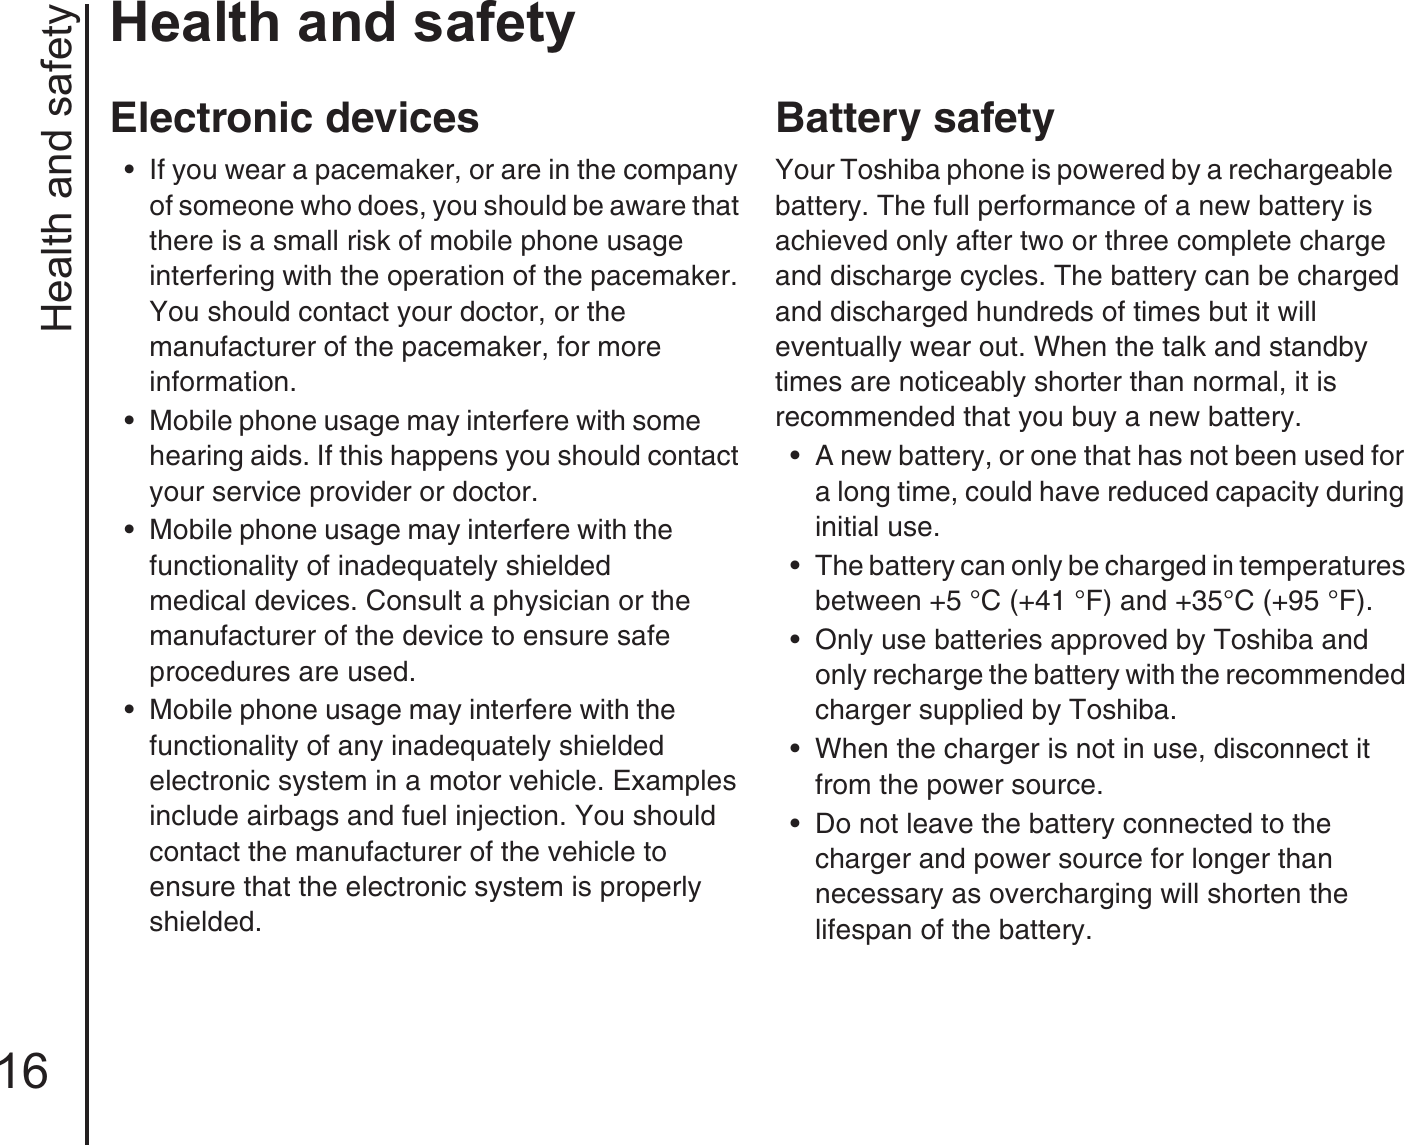 Health and safety16Health and safetyElectronic devices• If you wear a pacemaker, or are in the company of someone who does, you should be aware that there is a small risk of mobile phone usage        interfering with the operation of the pacemaker. You should contact your doctor, or the            manufacturer of the pacemaker, for more           information.• Mobile phone usage may interfere with some       hearing aids. If this happens you should contact your service provider or doctor.• Mobile phone usage may interfere with the           functionality of inadequately shielded              medical devices. Consult a physician or the manufacturer of the device to ensure safe        procedures are used.• Mobile phone usage may interfere with the          functionality of any inadequately shielded      electronic system in a motor vehicle. Examples include airbags and fuel injection. You should contact the manufacturer of the vehicle to         ensure that the electronic system is properly shielded.Battery safetyYour Toshiba phone is powered by a rechargeable   battery. The full performance of a new battery is achieved only after two or three complete charge and discharge cycles. The battery can be charged and discharged hundreds of times but it will        eventually wear out. When the talk and standby times are noticeably shorter than normal, it is        recommended that you buy a new battery.• A new battery, or one that has not been used for a long time, could have reduced capacity during initial use. • The battery can only be charged in temperatures between +5 °C (+41 °F) and +35°C (+95 °F).• Only use batteries approved by Toshiba and only recharge the battery with the recommended charger supplied by Toshiba. • When the charger is not in use, disconnect it from the power source.• Do not leave the battery connected to the    charger and power source for longer than      necessary as overcharging will shorten the lifespan of the battery.